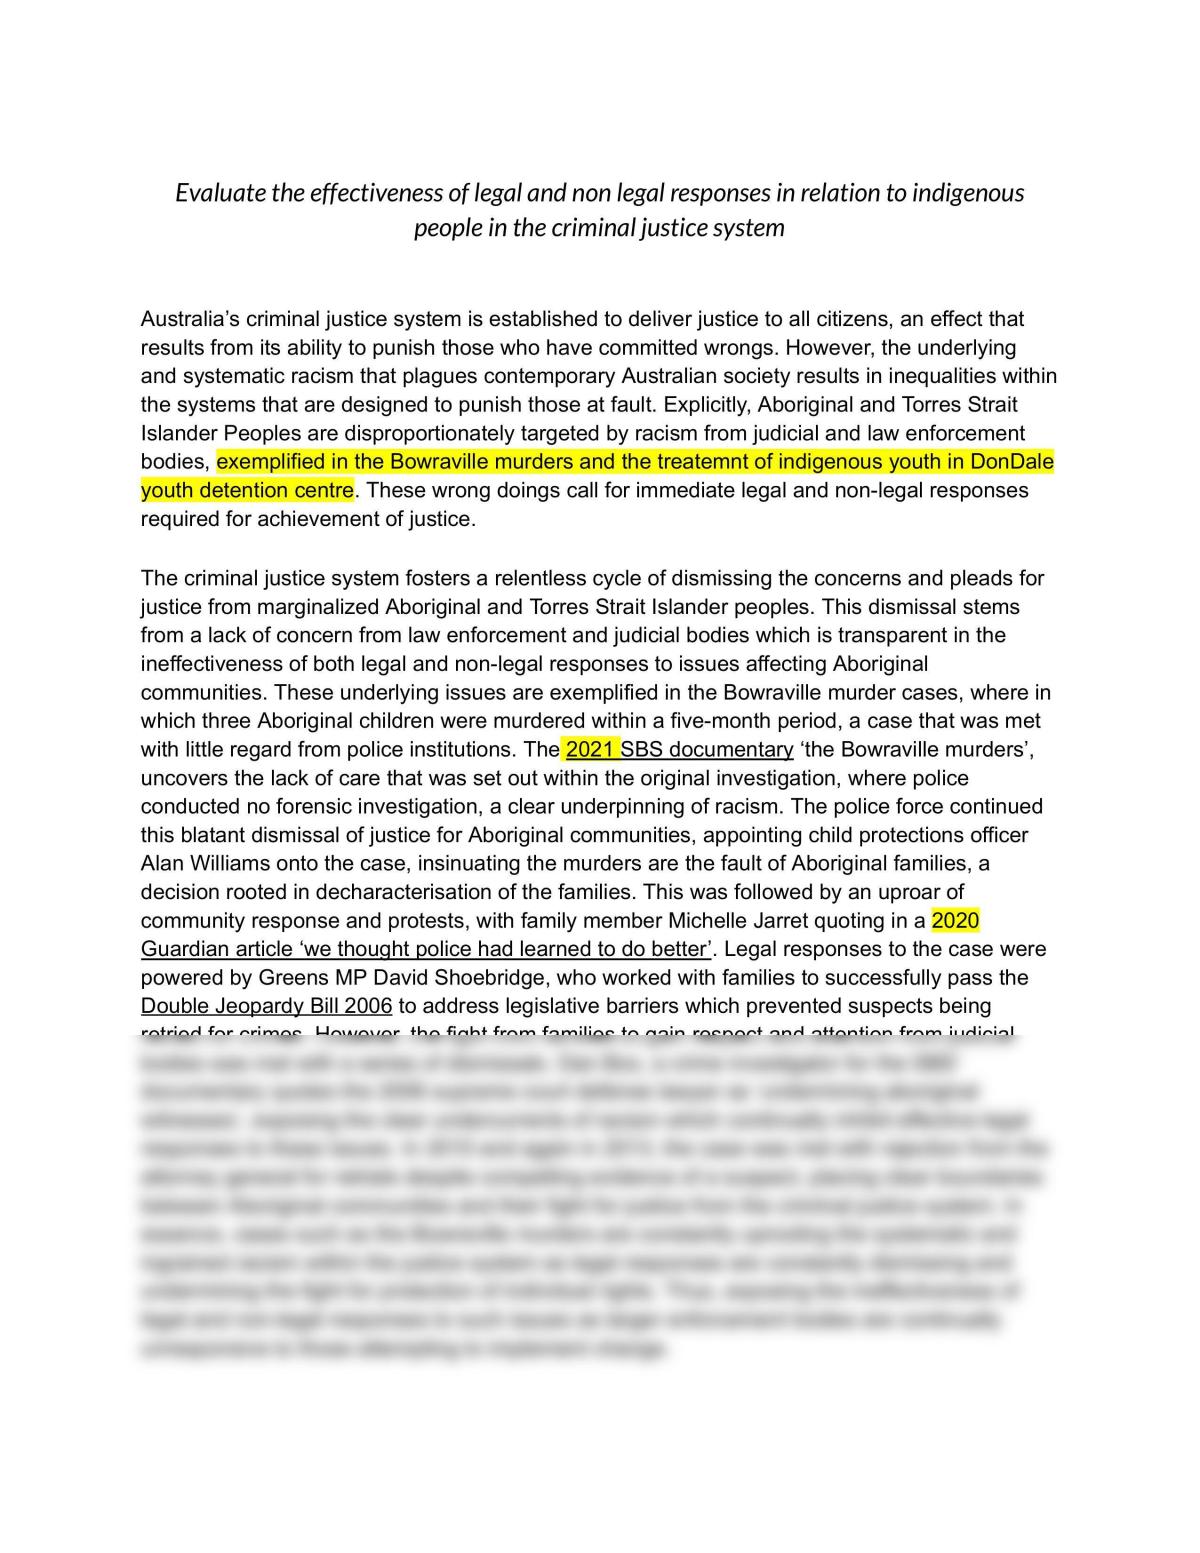 Legal Studies essay - indigenous people in the criminal justice system - Page 1